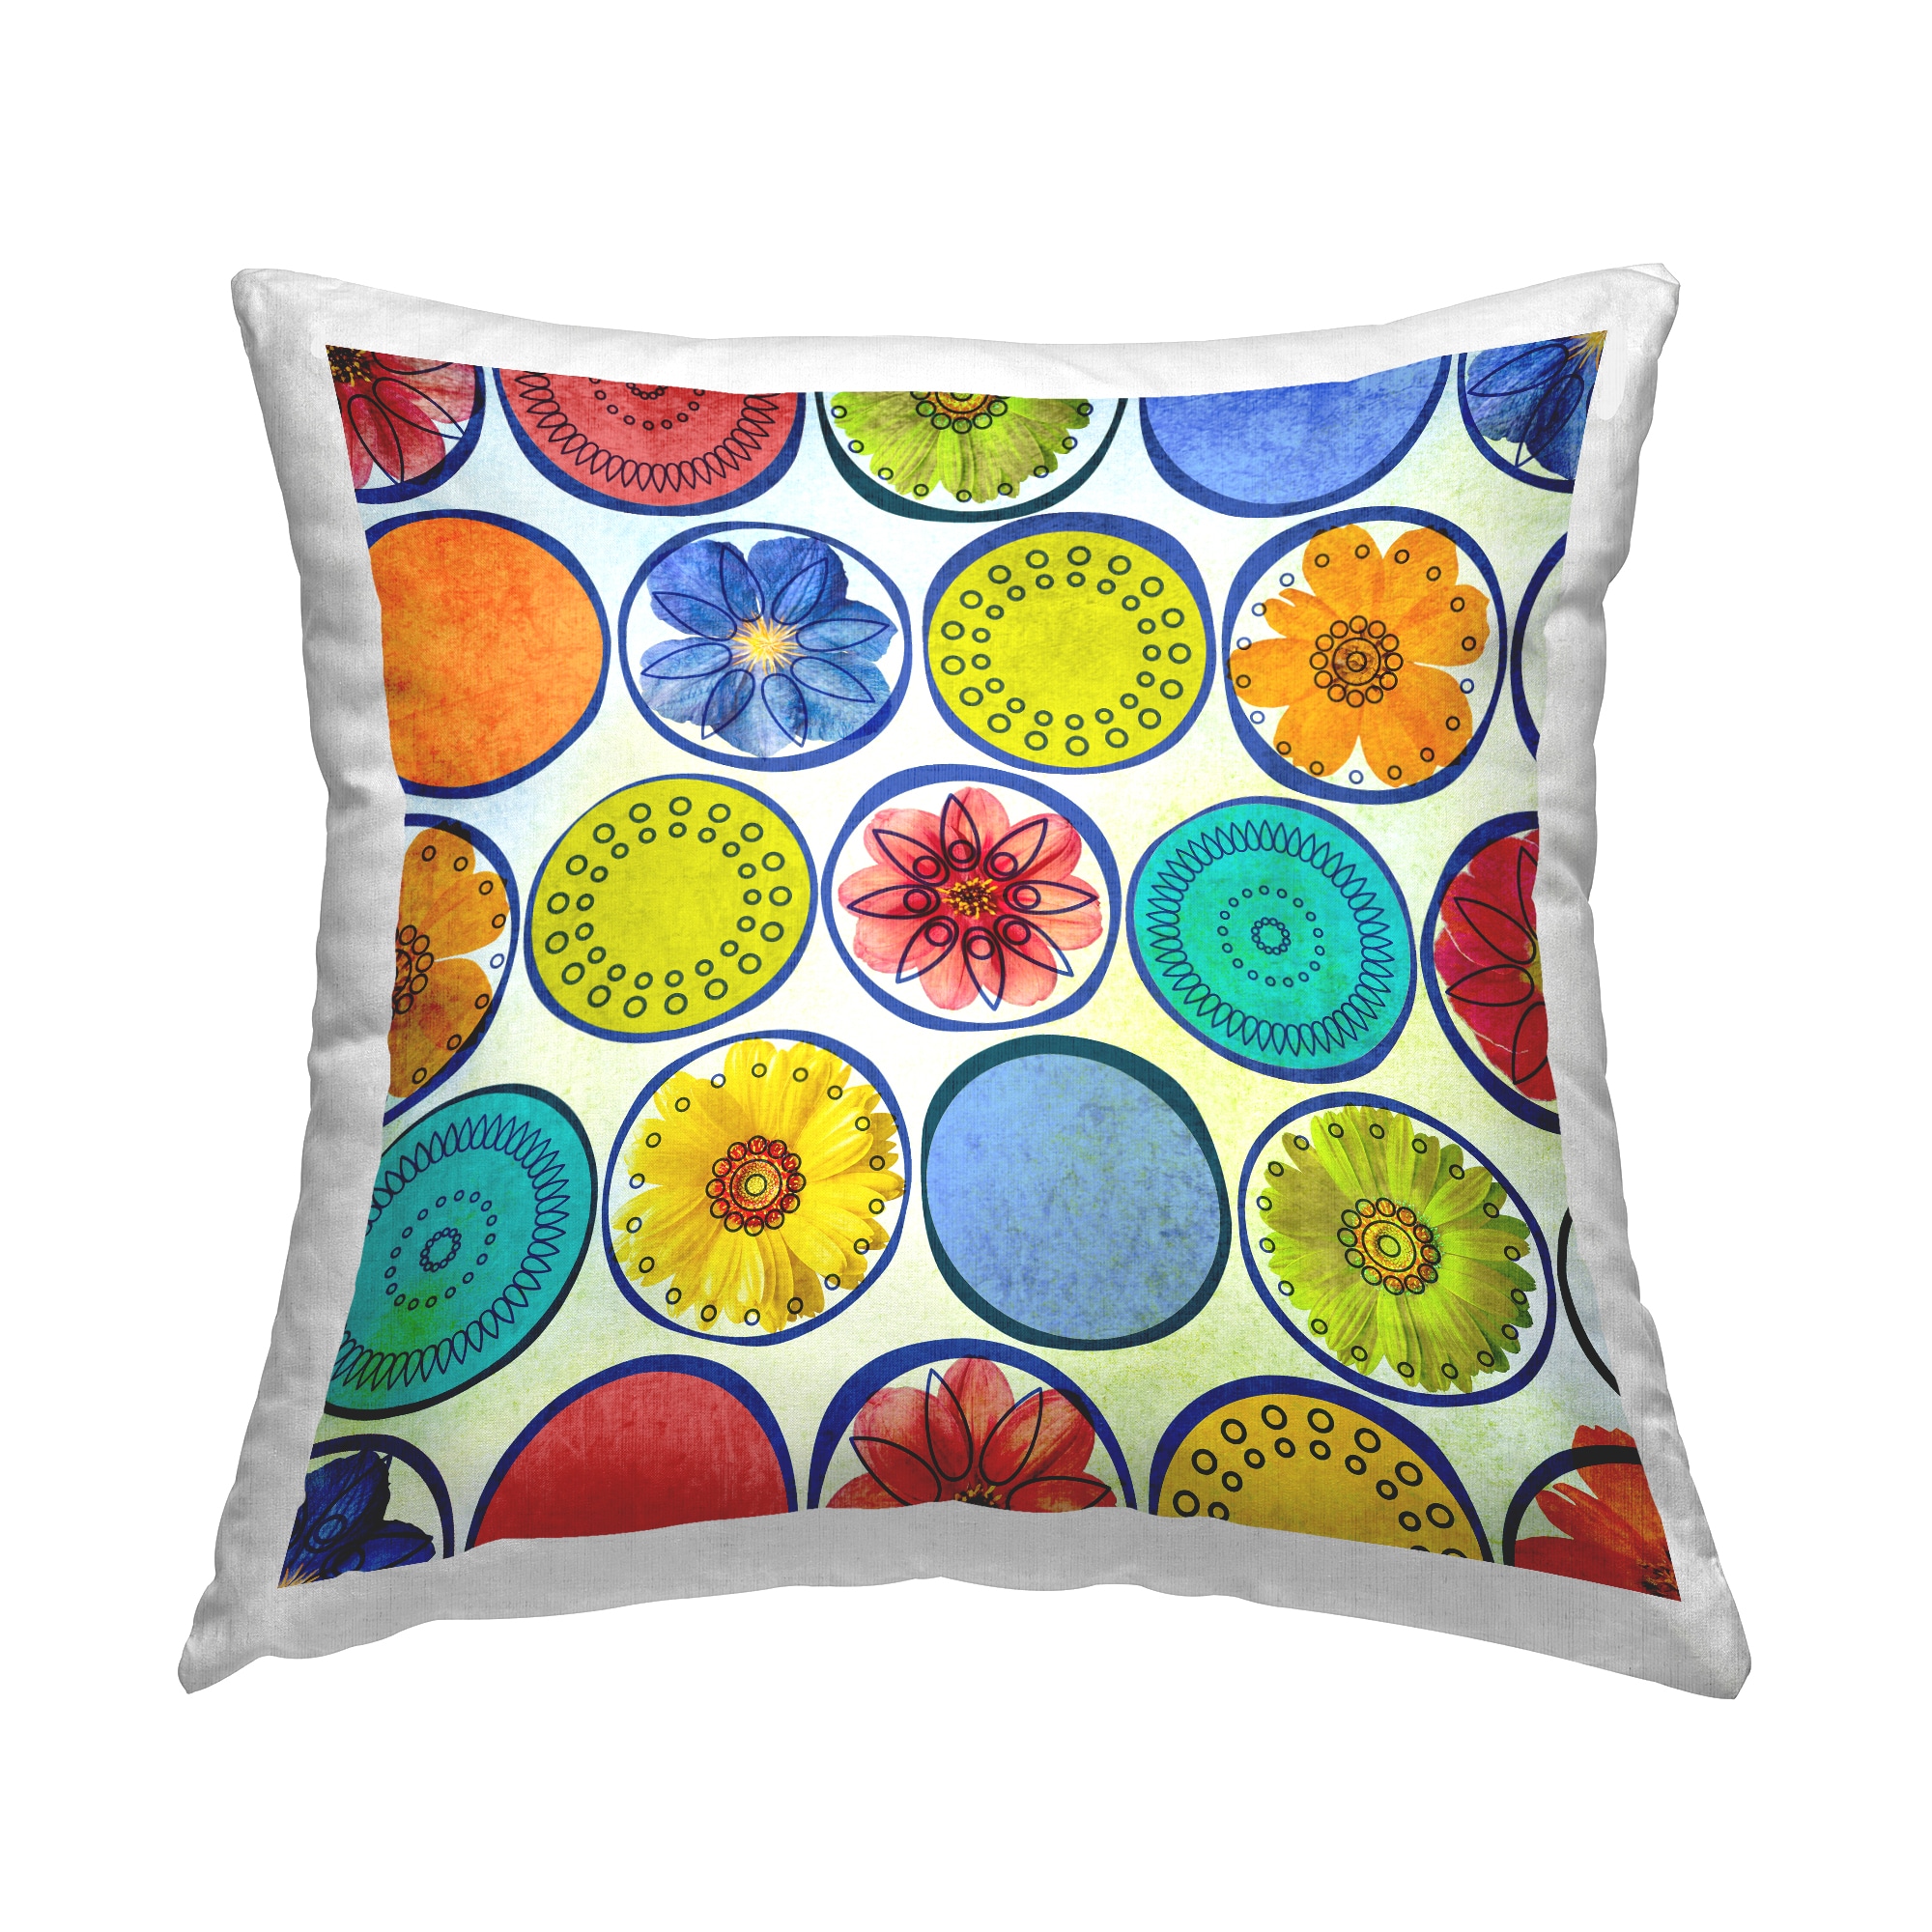 Multi-colored Spring Floral Throw Pillow (18x18) - The Pillow